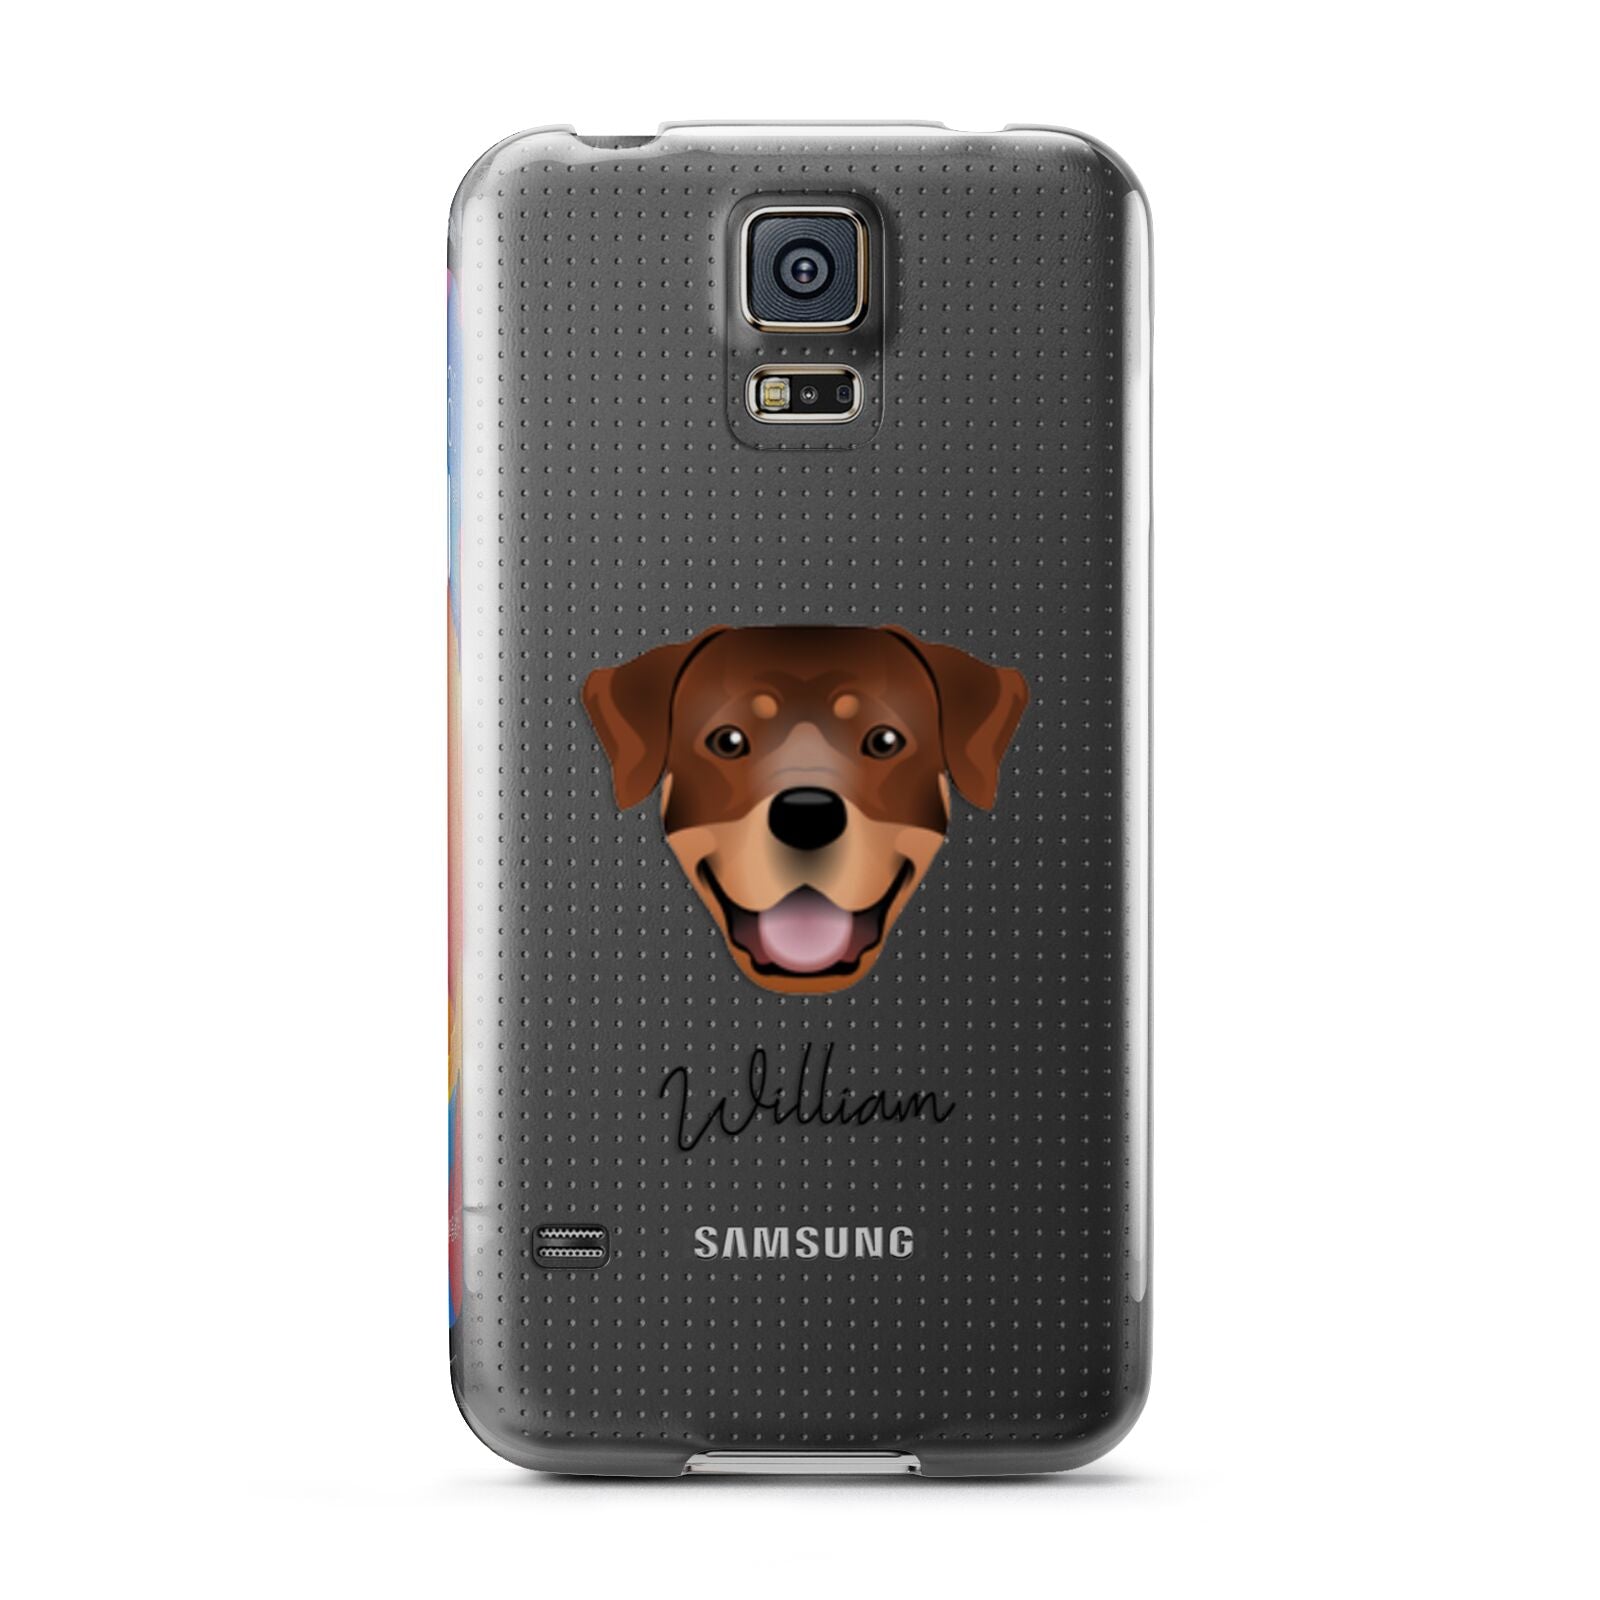 Rottweiler Personalised Samsung Galaxy S5 Case